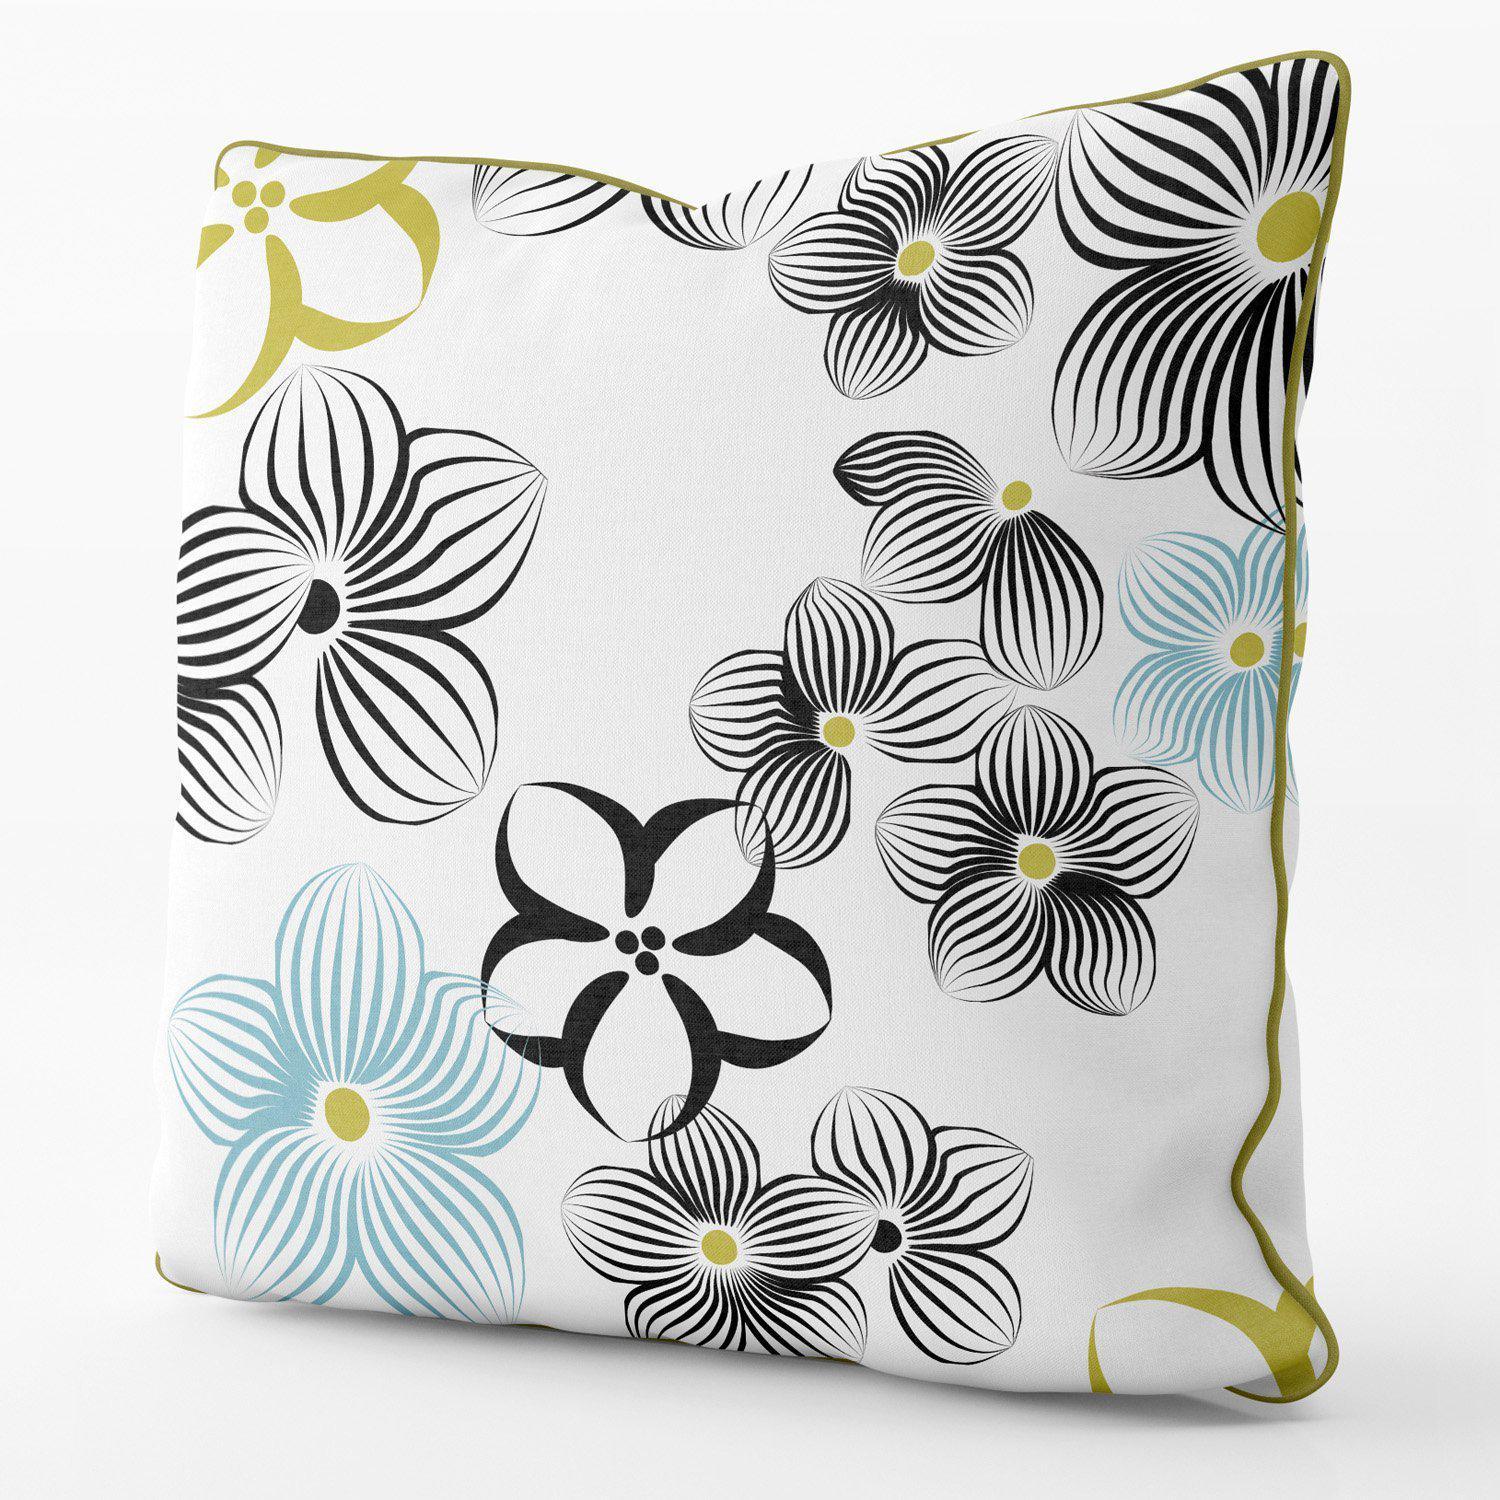 Floral Impression (White) - Funky Art Cushion - Perfect Day - House Of Turnowsky Pillows - Handmade Cushions UK - WeLoveCushions